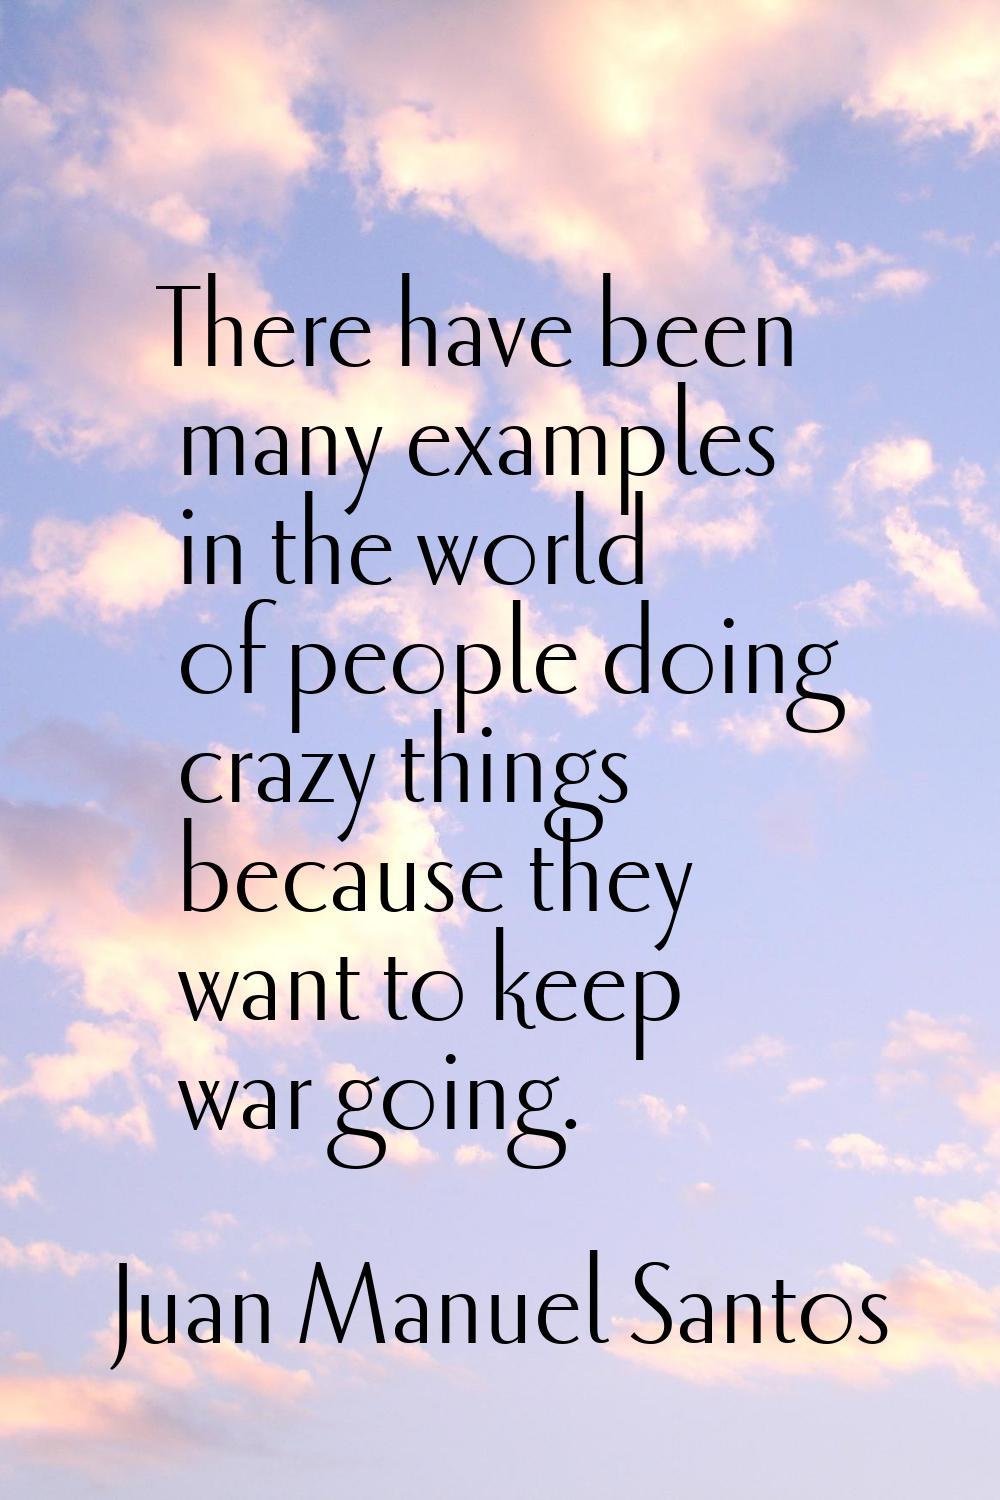 There have been many examples in the world of people doing crazy things because they want to keep w